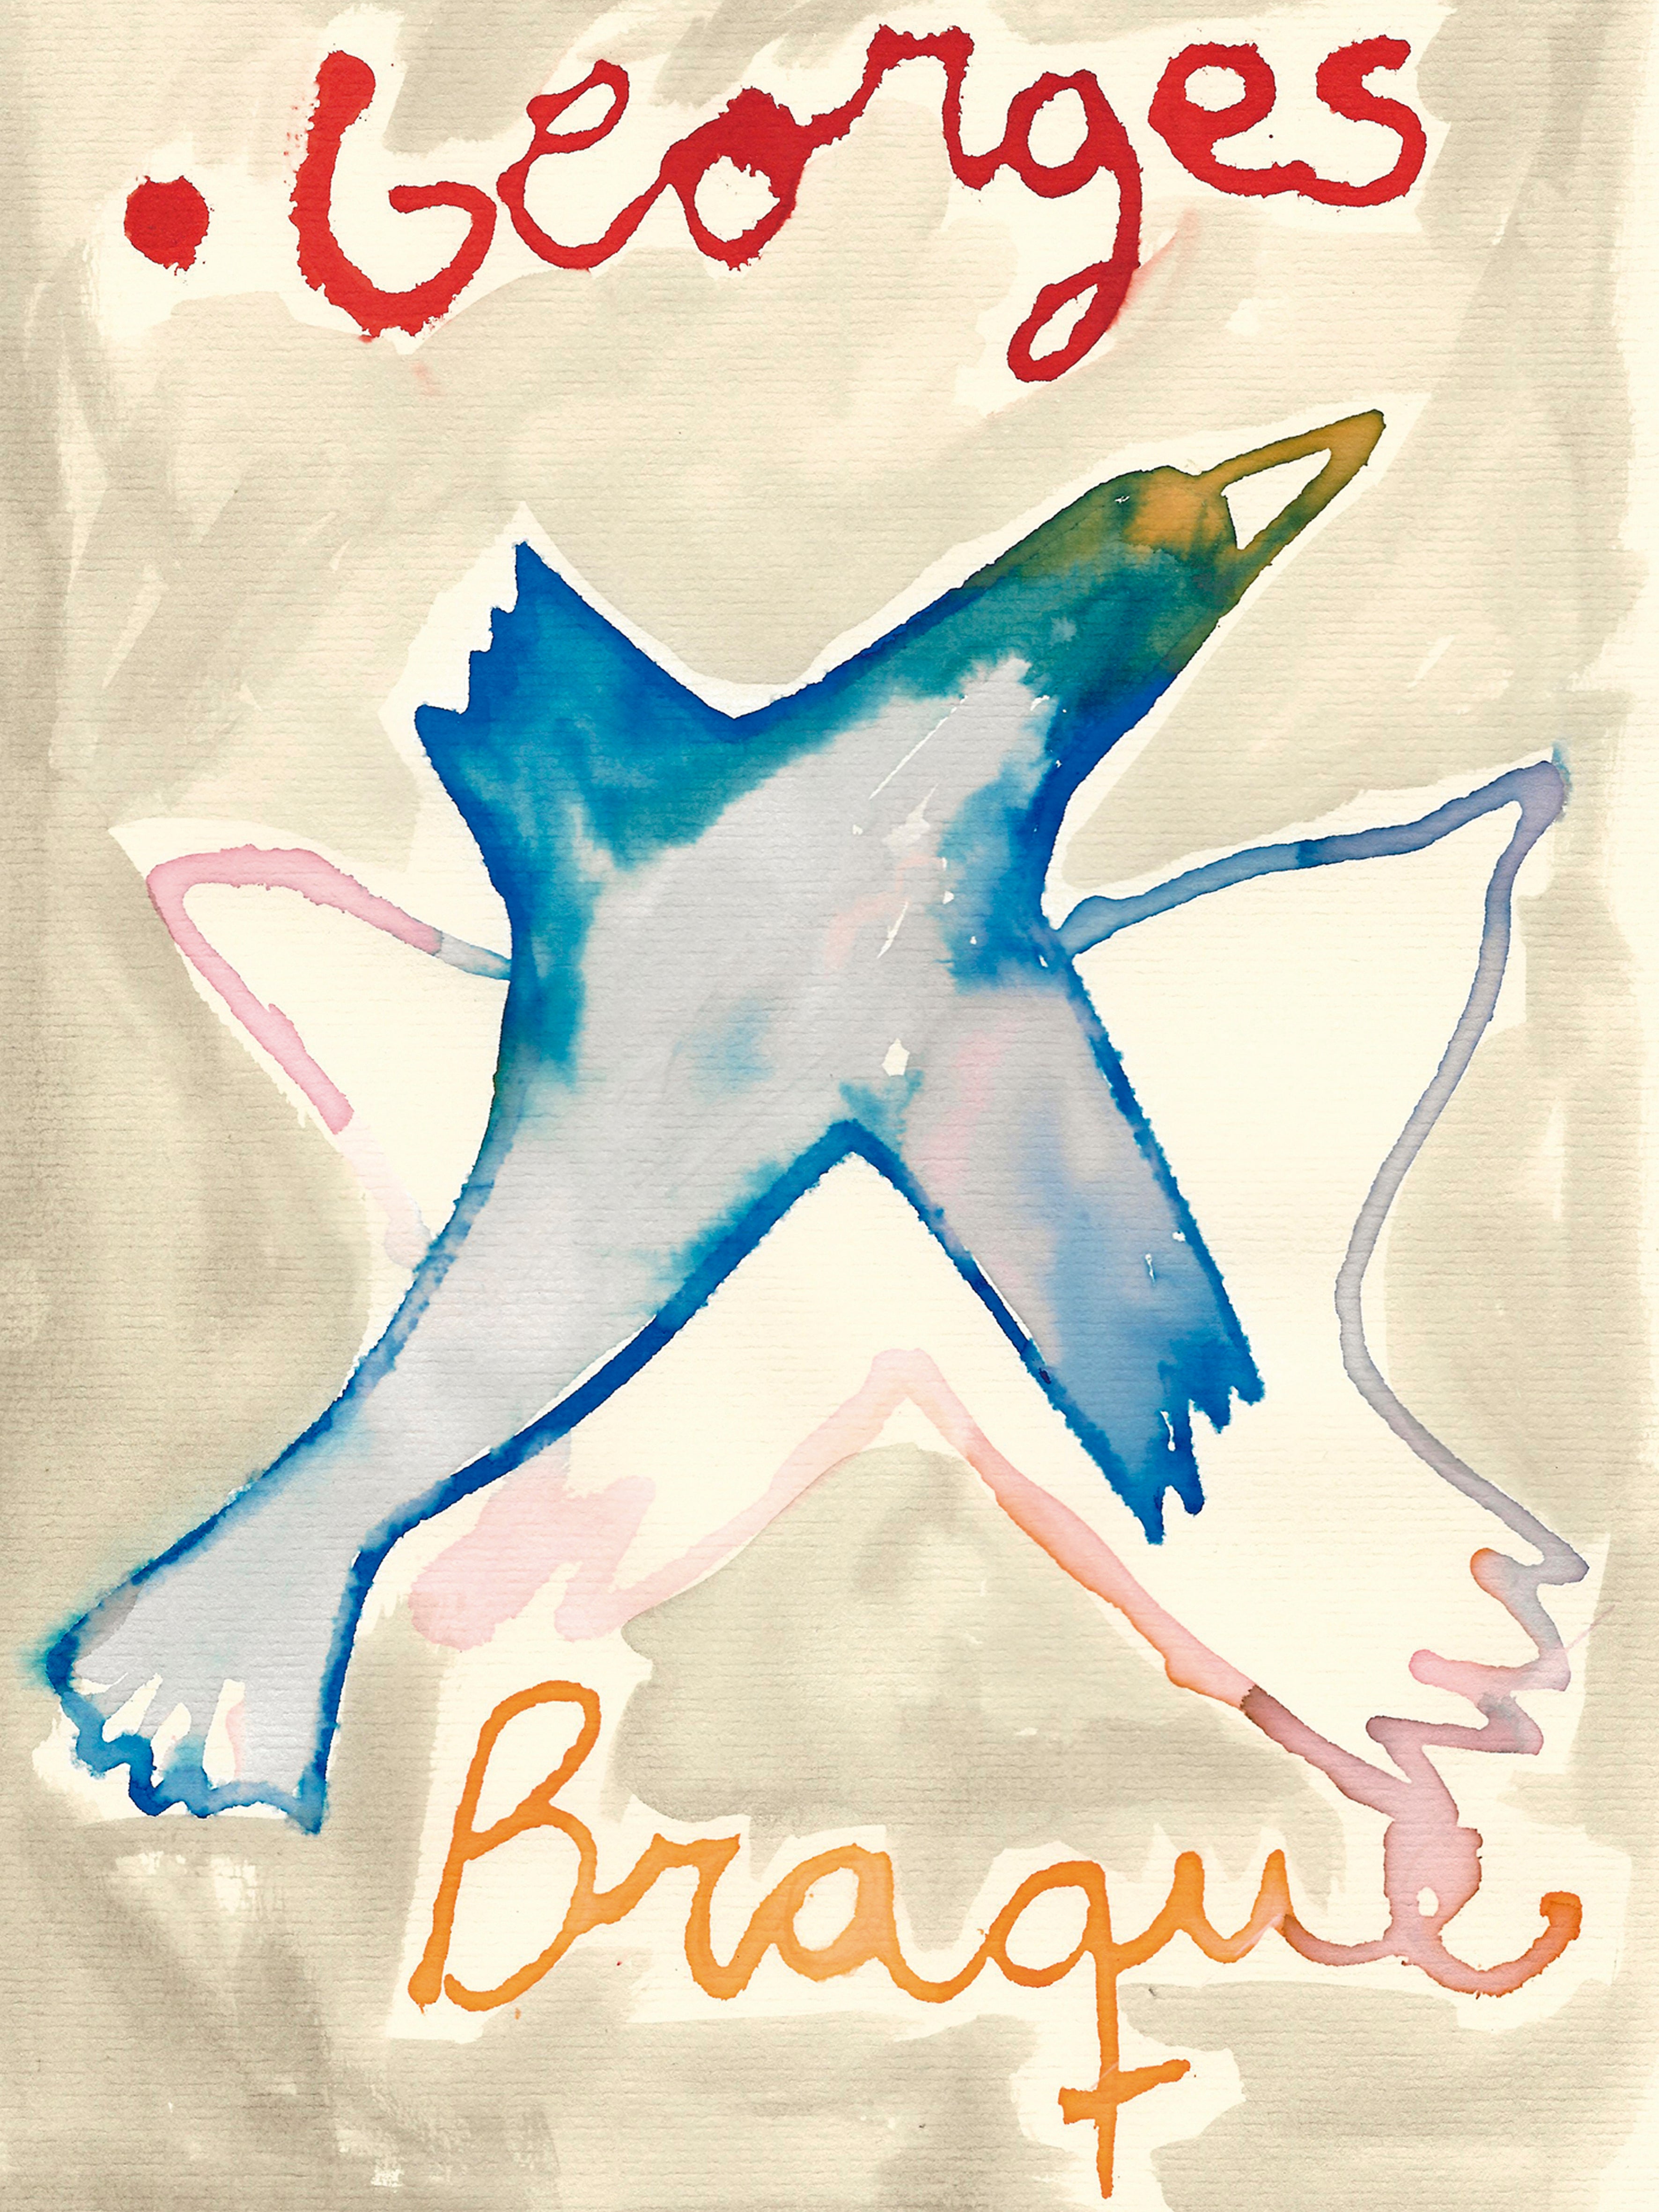 Homage to Braque